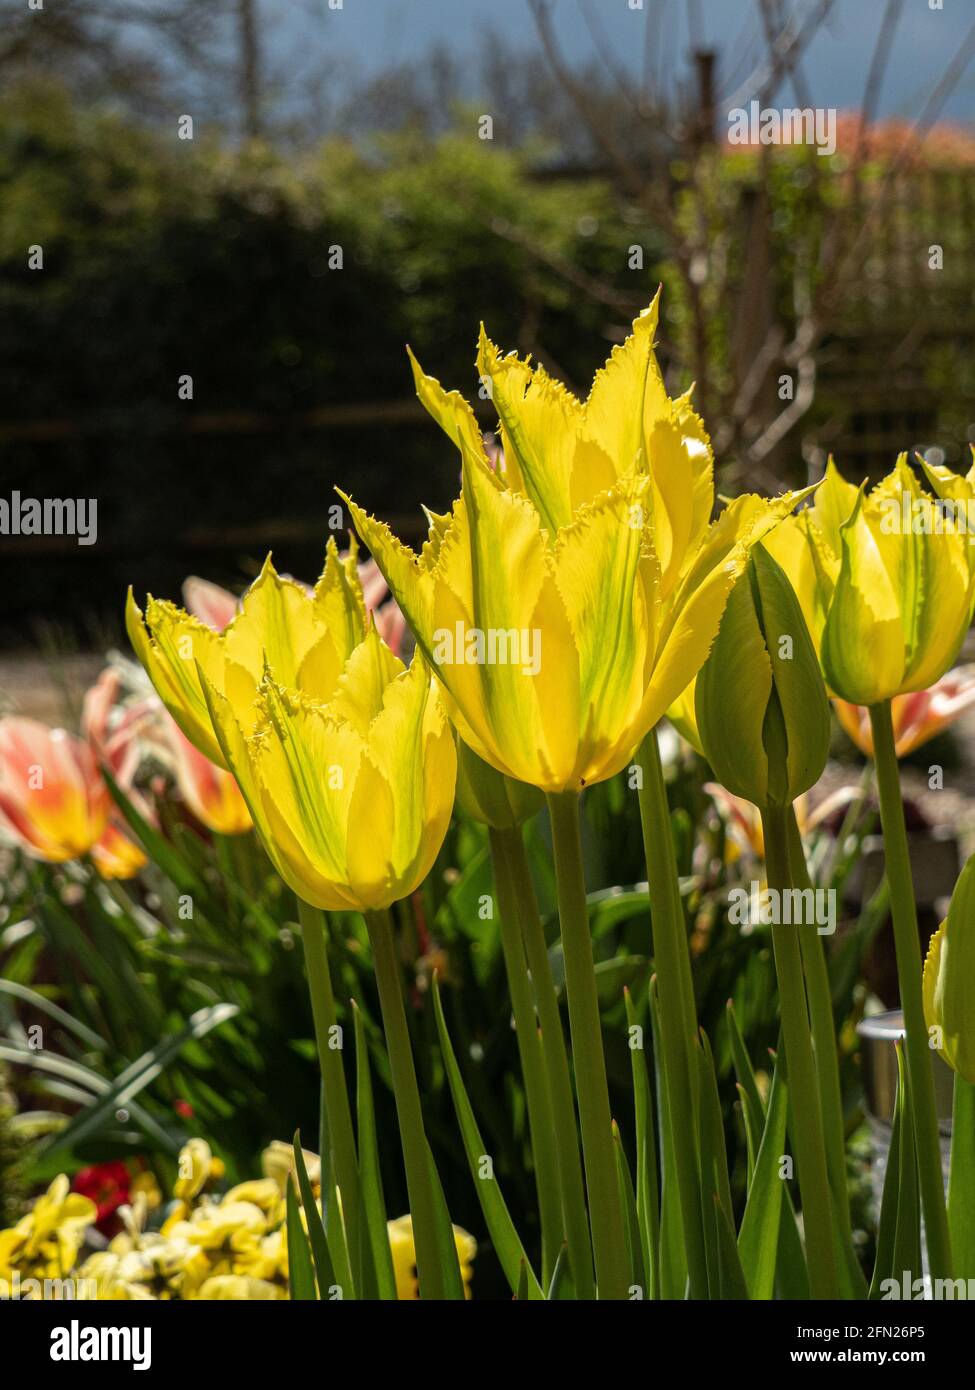 A group of the lemon and lime green flowers of the viridiflora Tulip 'Green Mile' Stock Photo